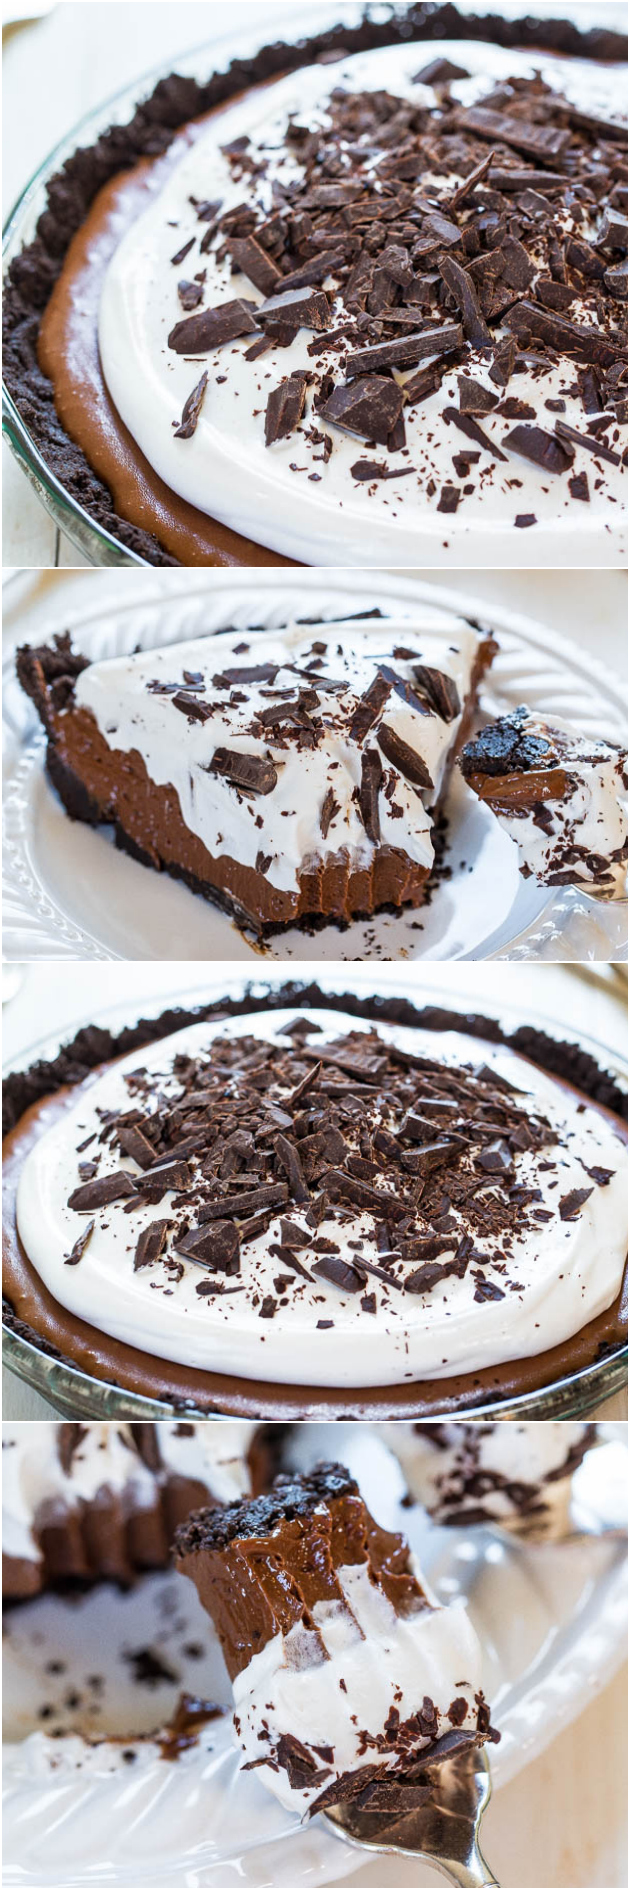 The Best French Silk Pie - Homemade French Silk is the most amazing thing ever! You HAVE to make this! Beyond words how crazy good it is!!